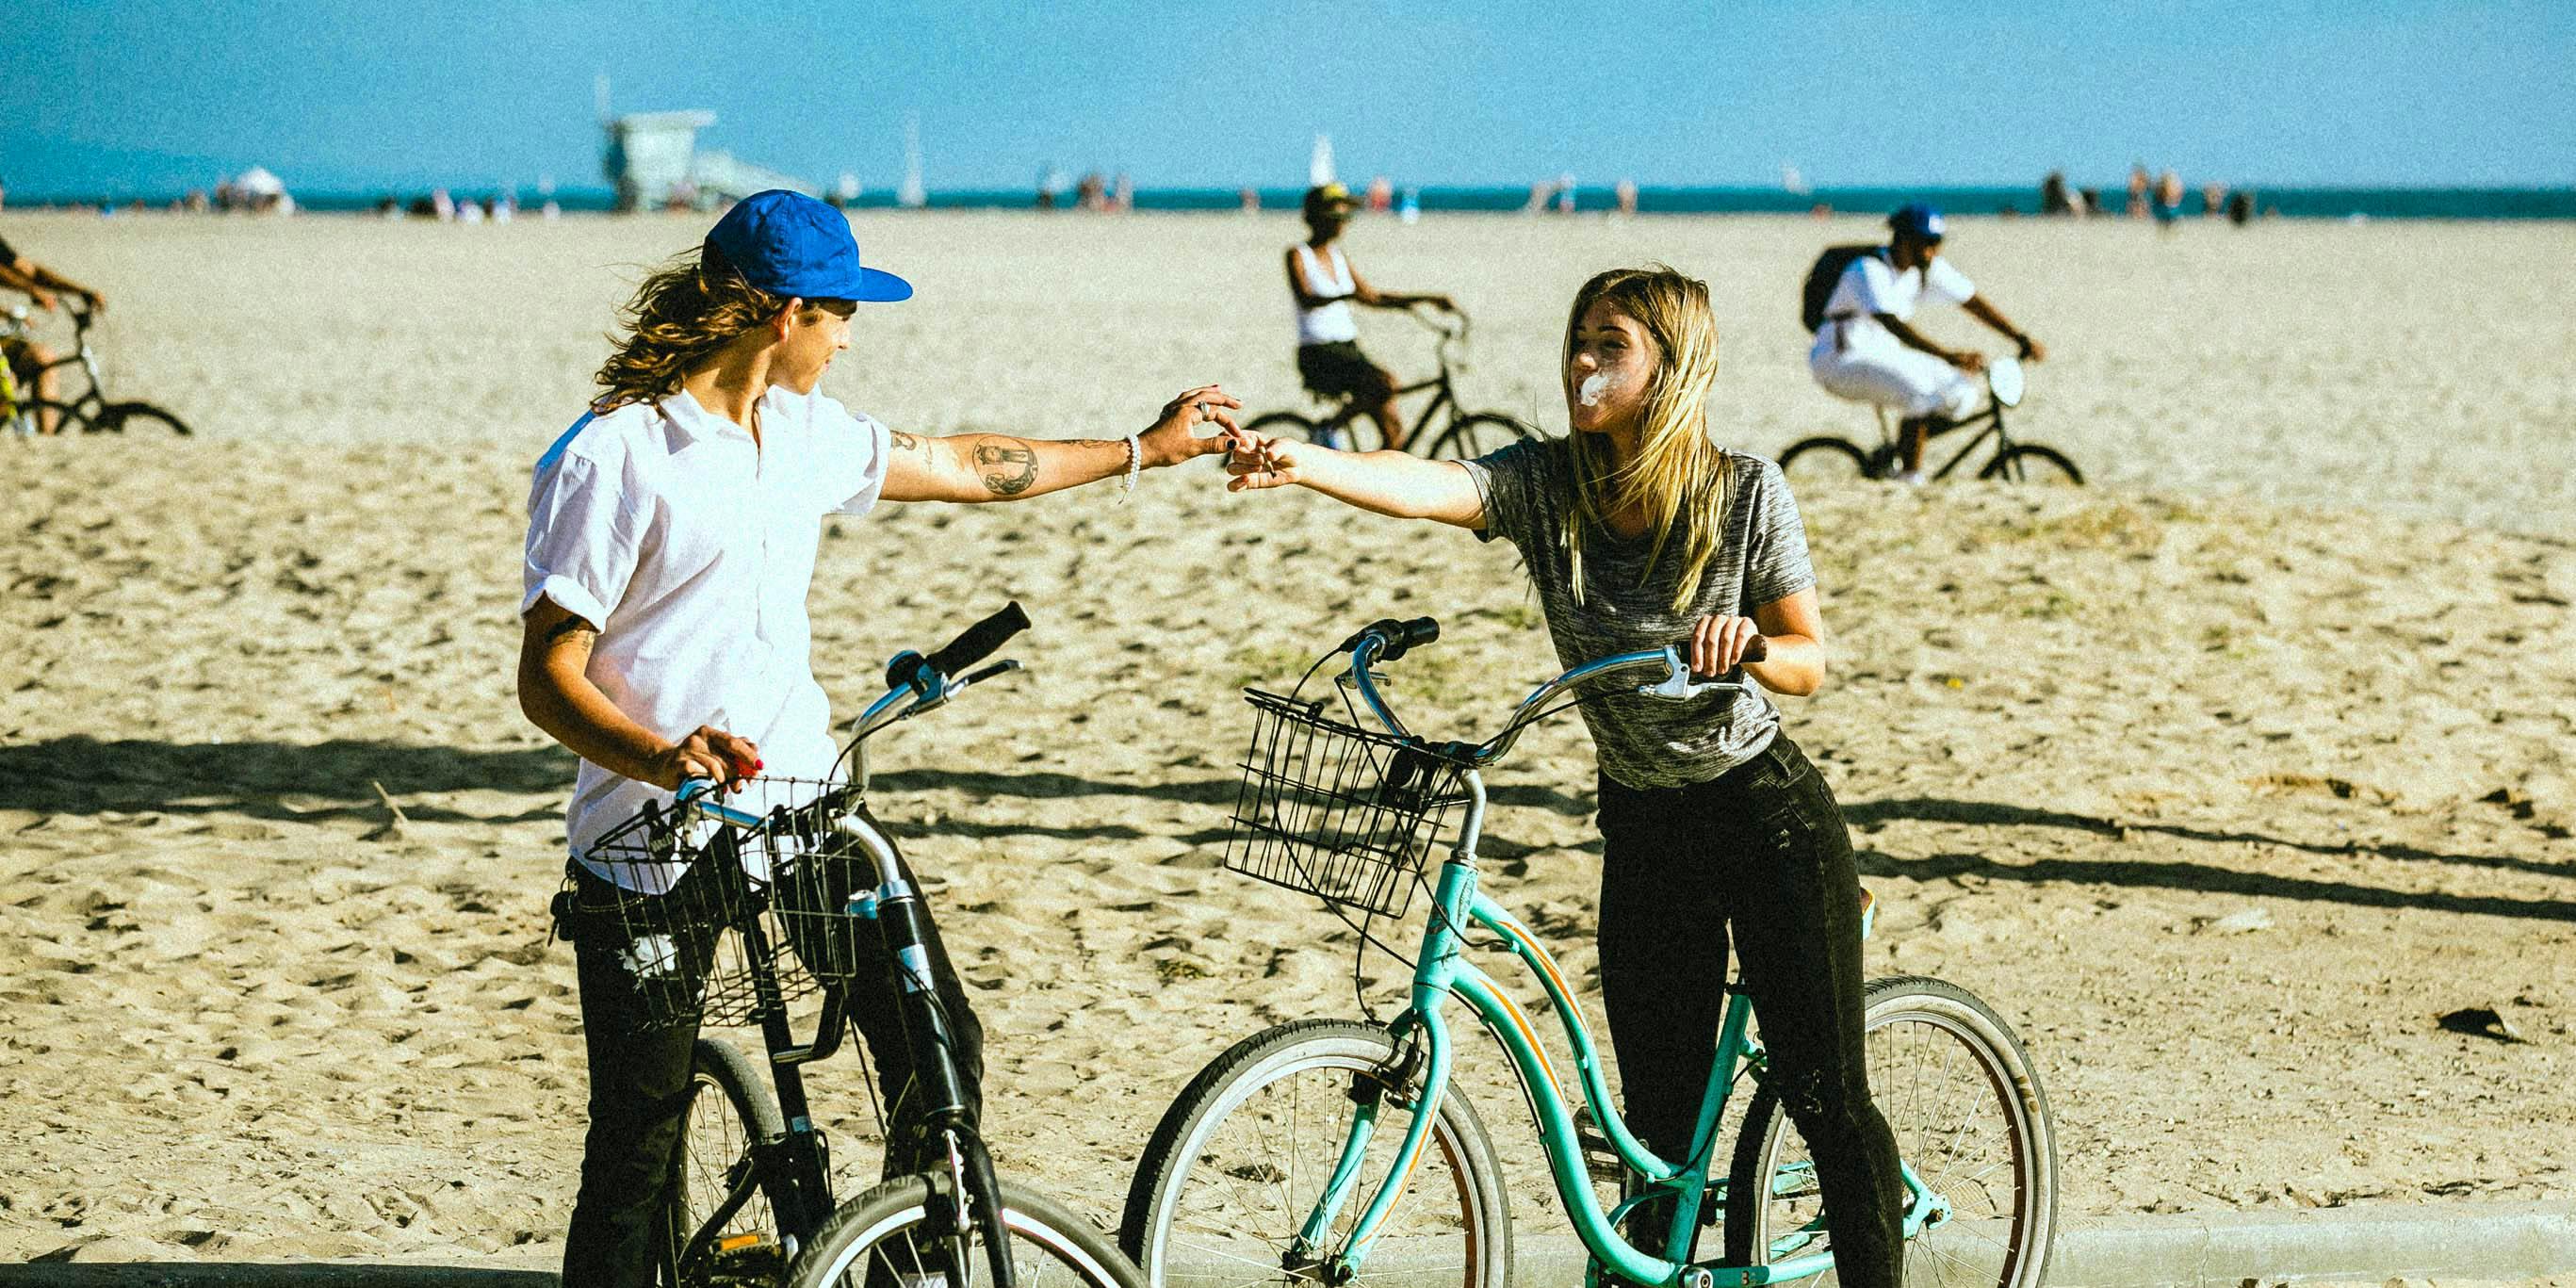 A couple share a joint on the beach. There are now more weed dating apps on the market to help people with a mutual love for the herb find their counterpart.